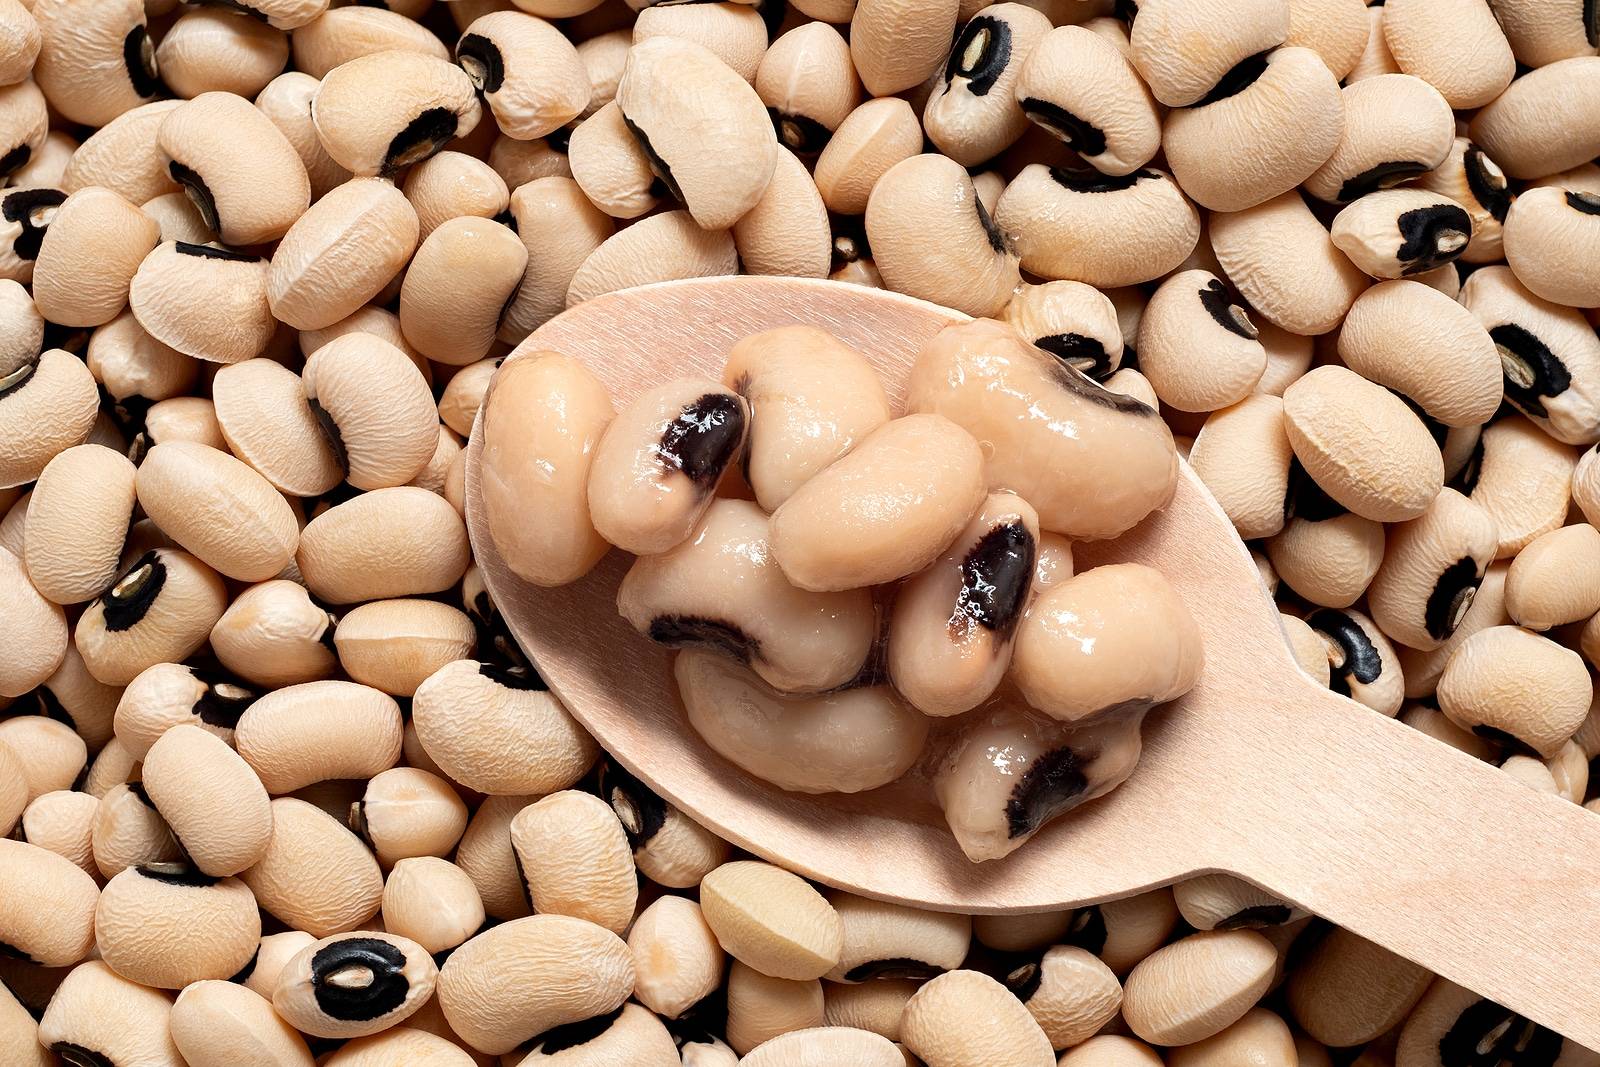  Boost Your Mood with Black-eyed peas